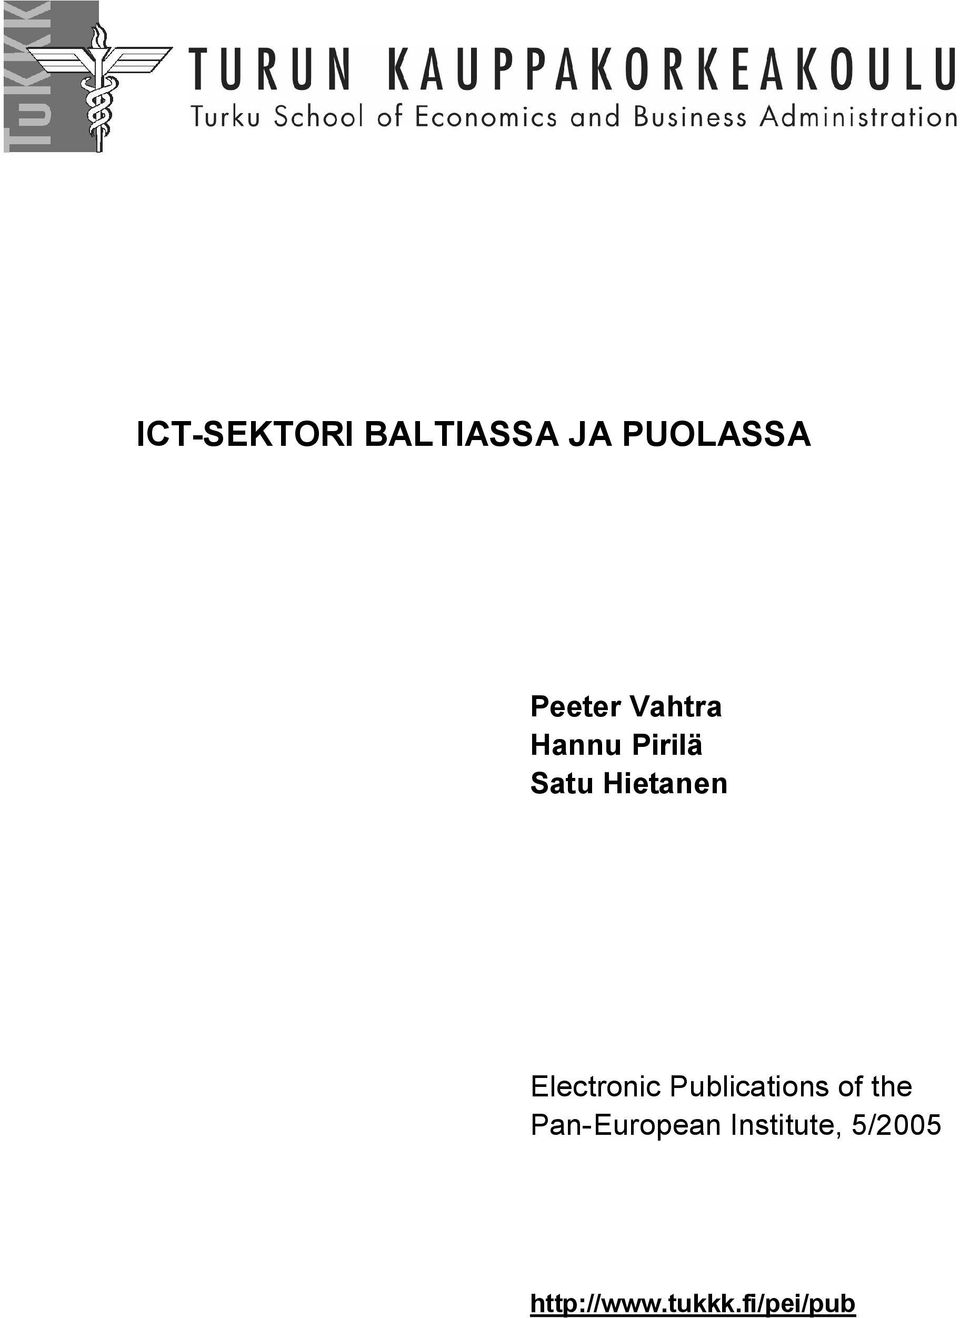 Electronic Publications of the Pan